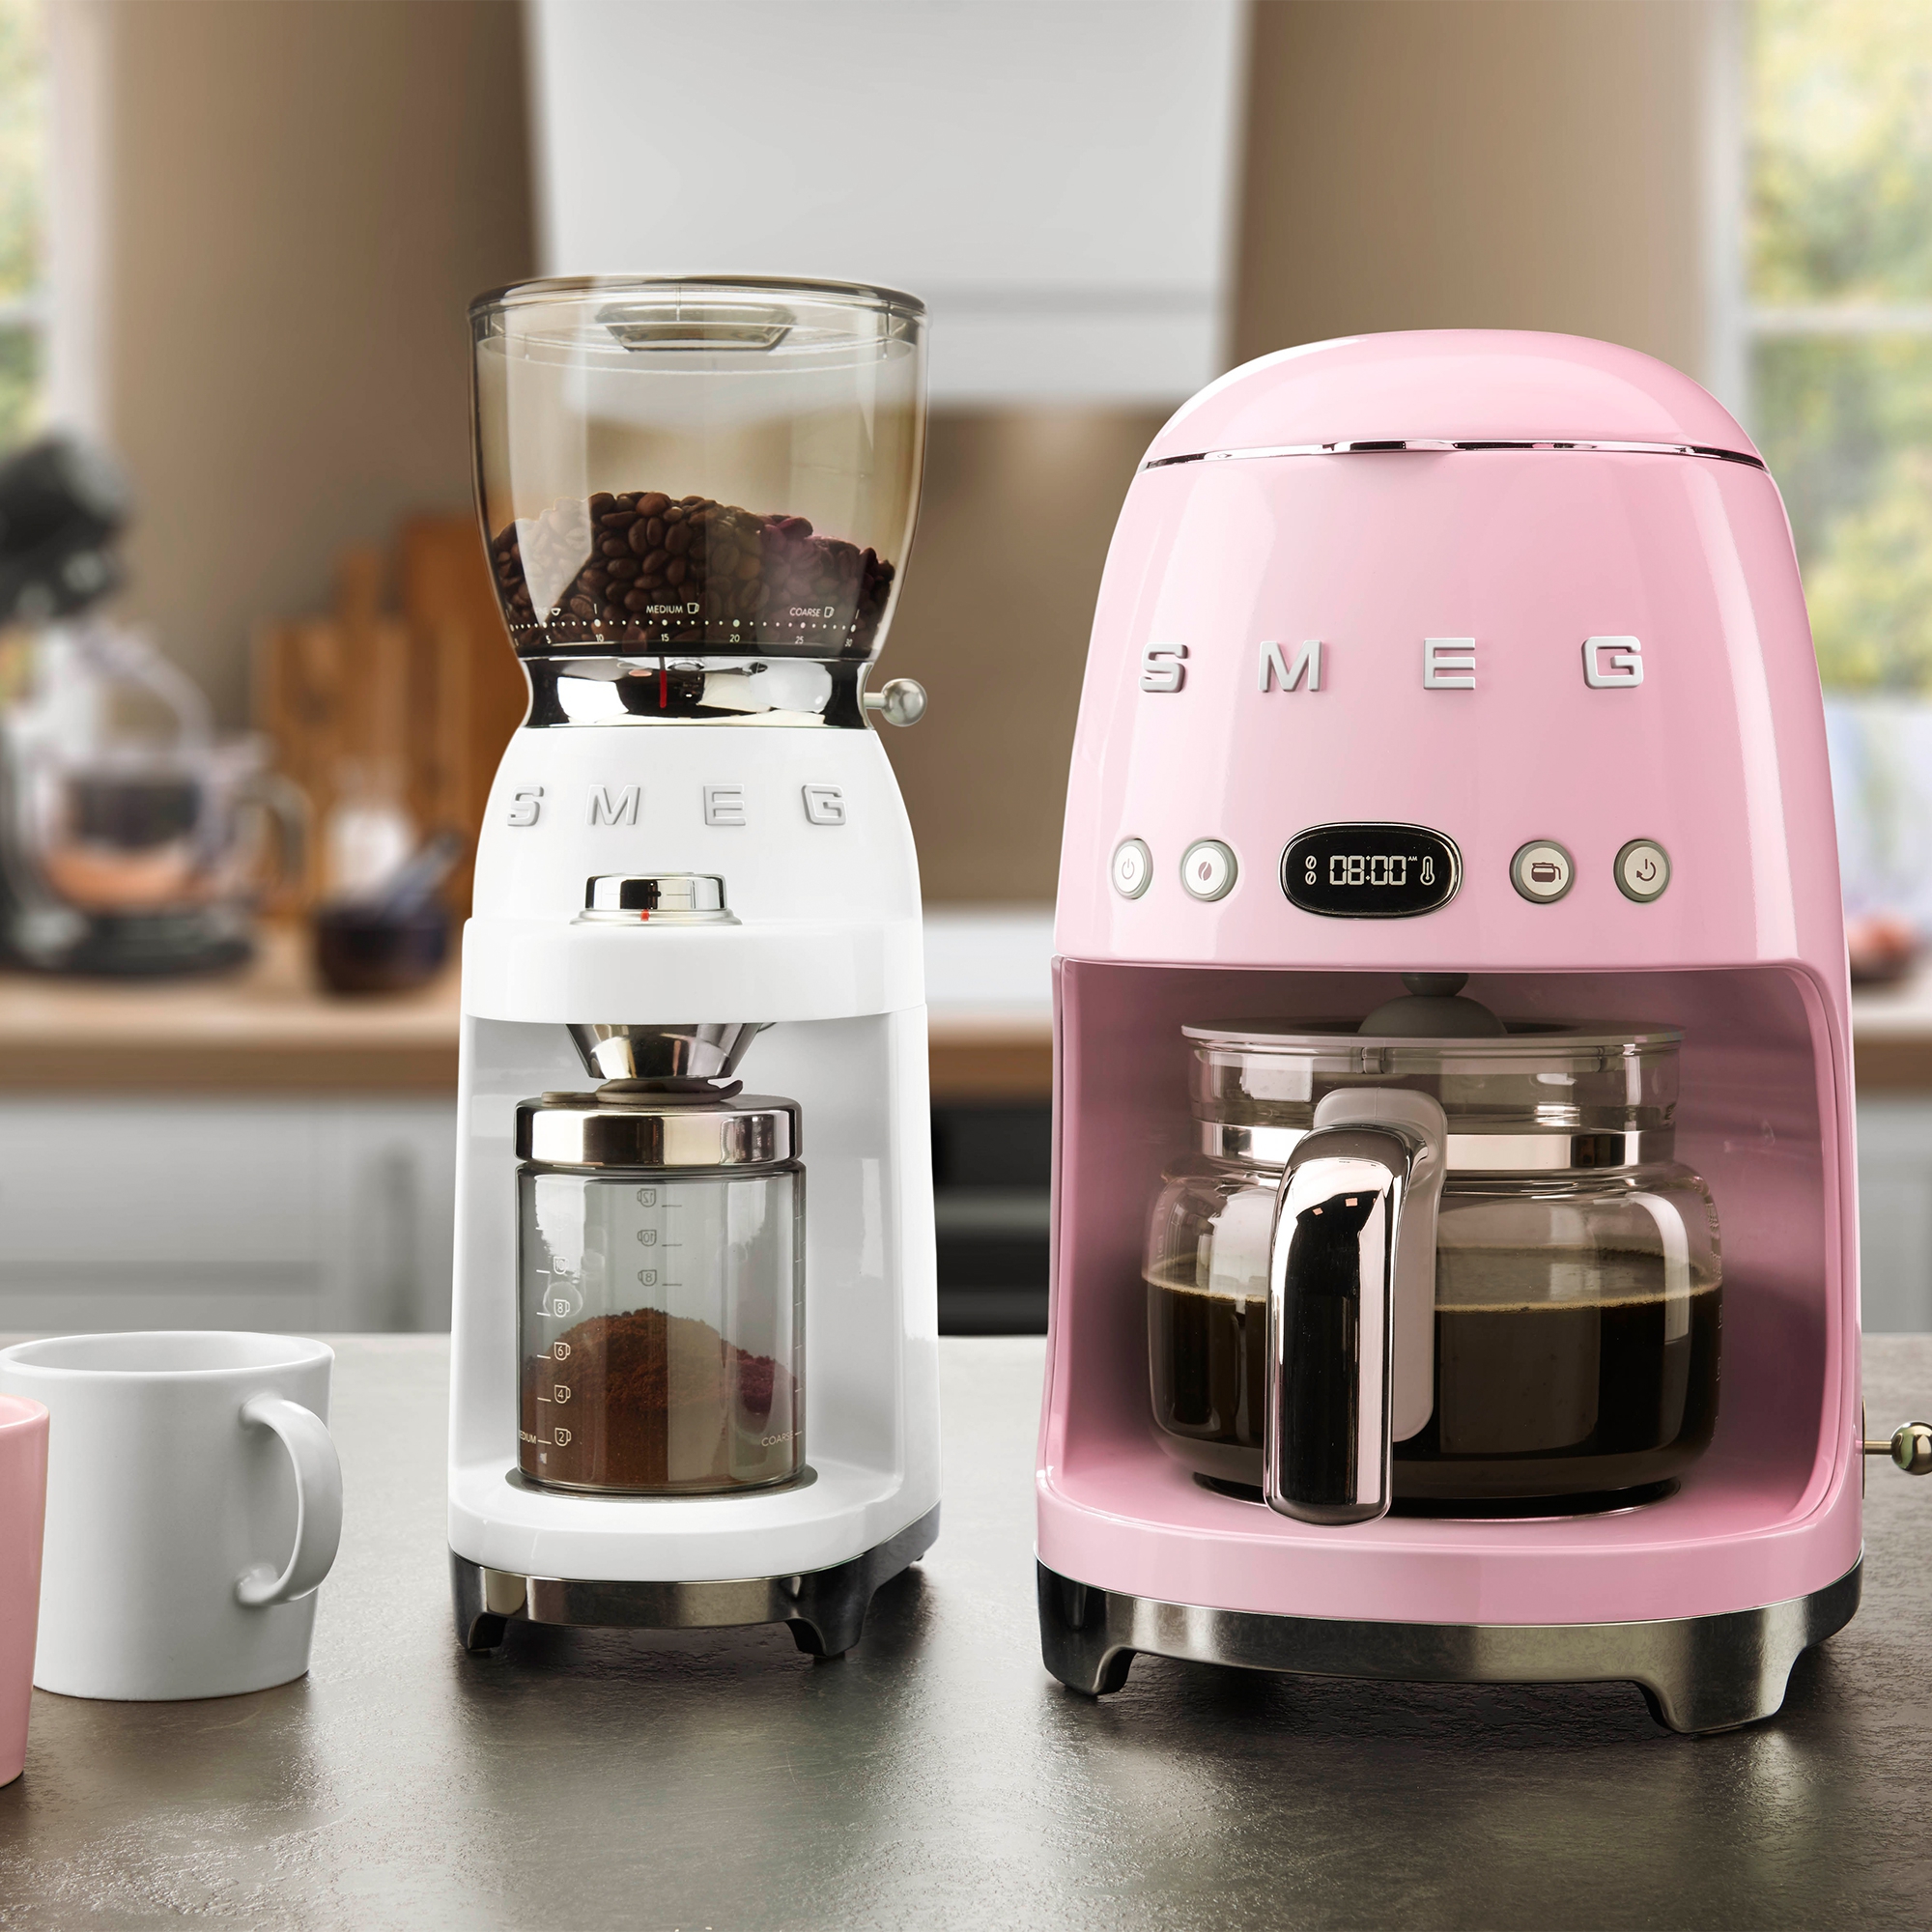 Smeg - Filter coffee - design line style The 50 ° years